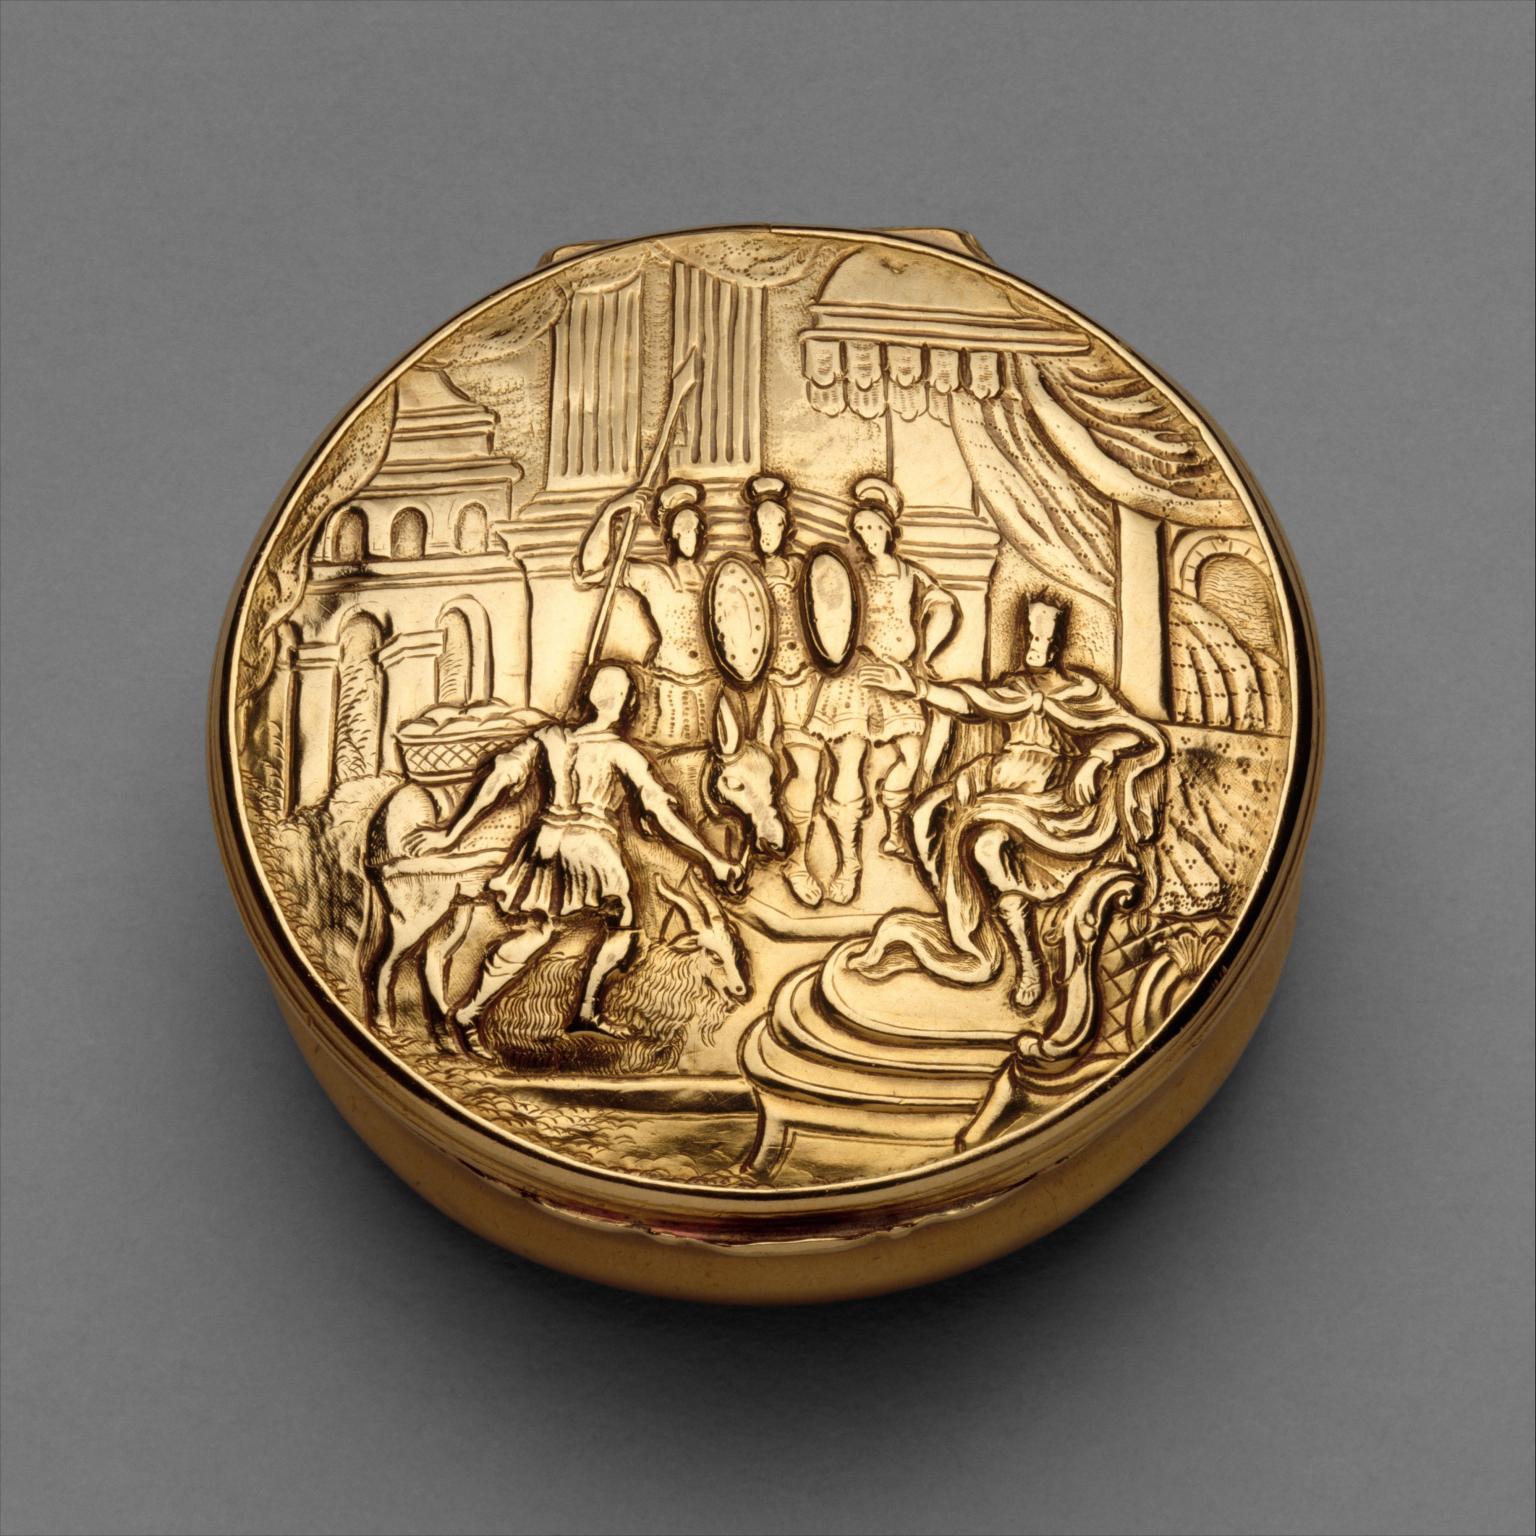 Gold circular box featuring soldiers and men with donkeys.